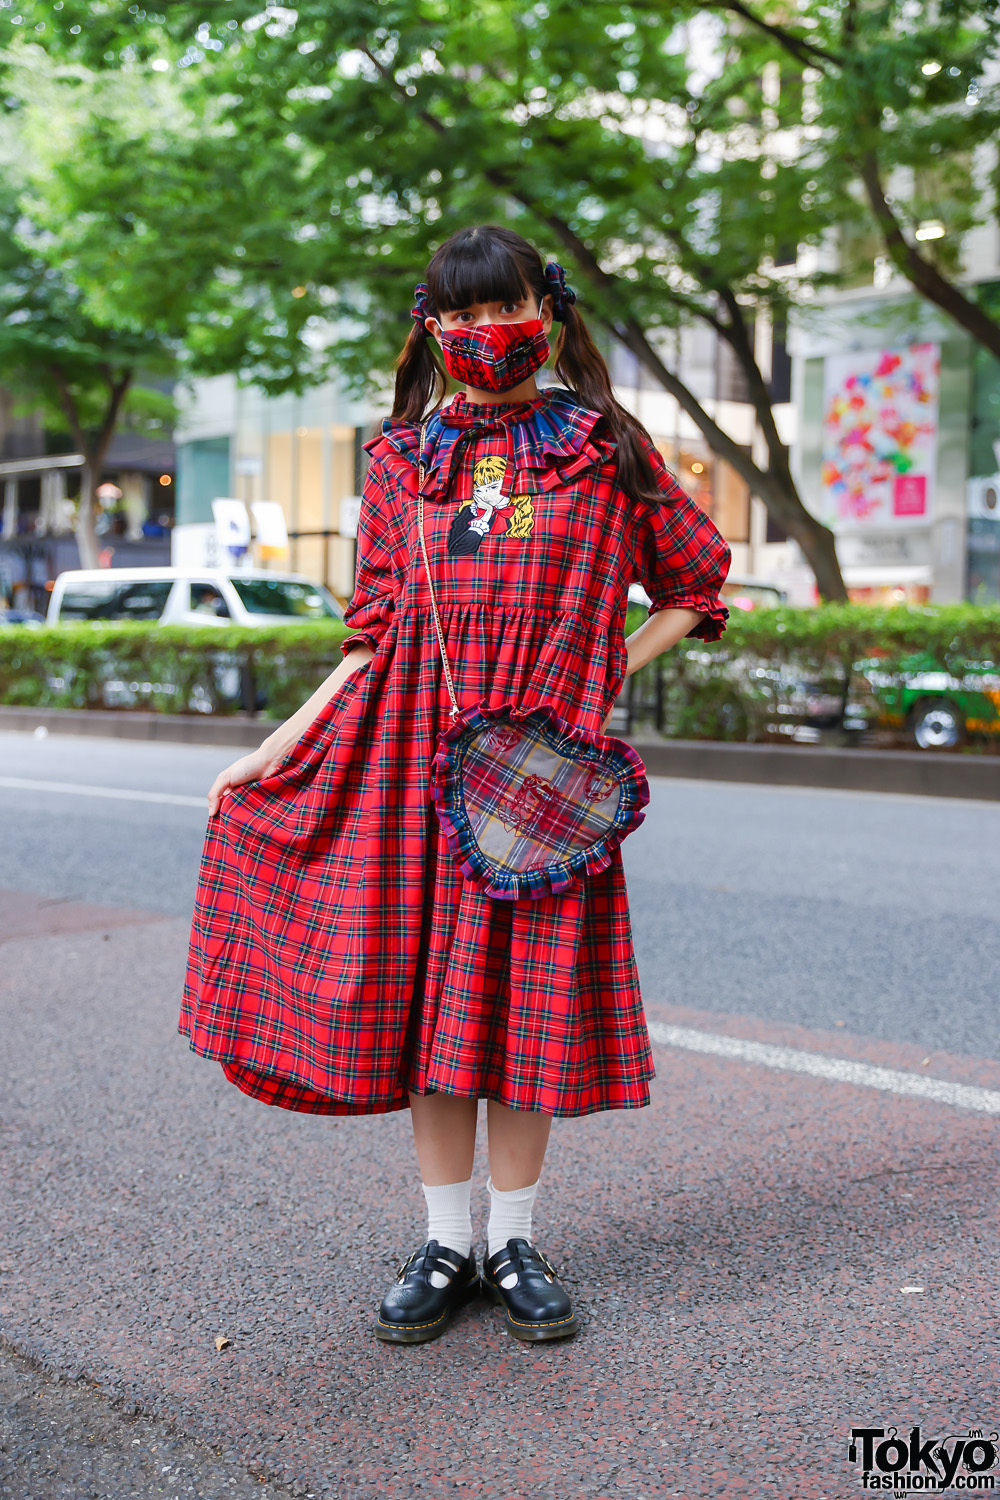 All Plaid HEIHEI Harajuku Streetwear Style w/ Twin Tails, Face Mask, Detached Collar, Heart-Shaped Bag & Dr. Martens Double-Strap Mary Janes